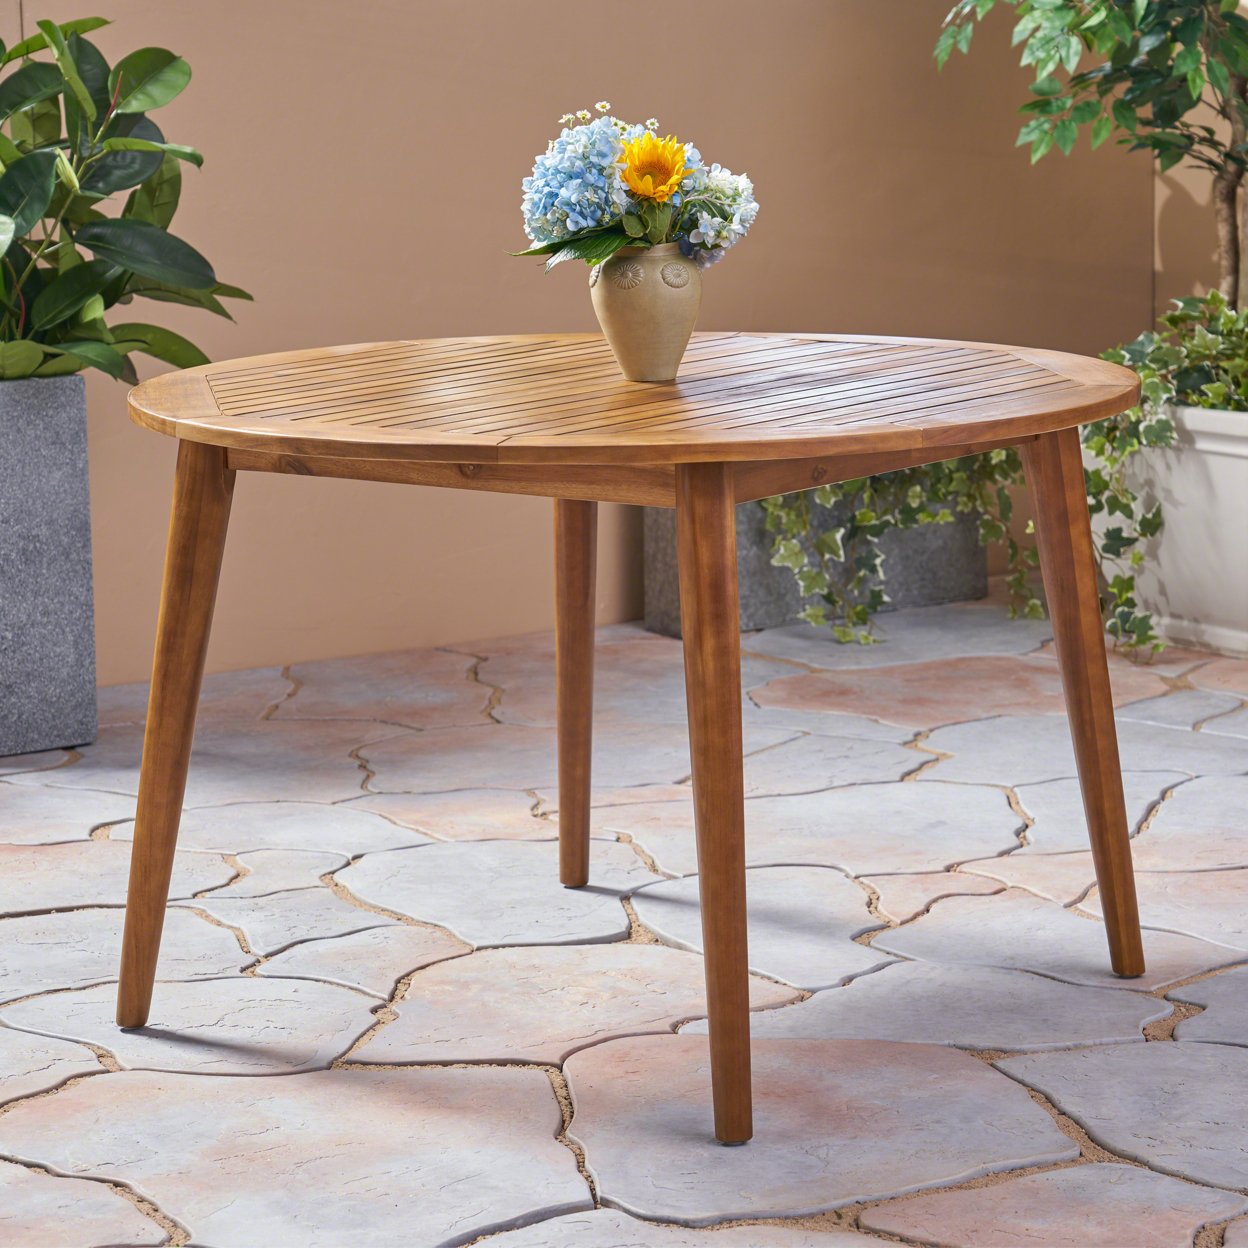 Nick Outdoor Acacia Wood Round Dining Table - Gray